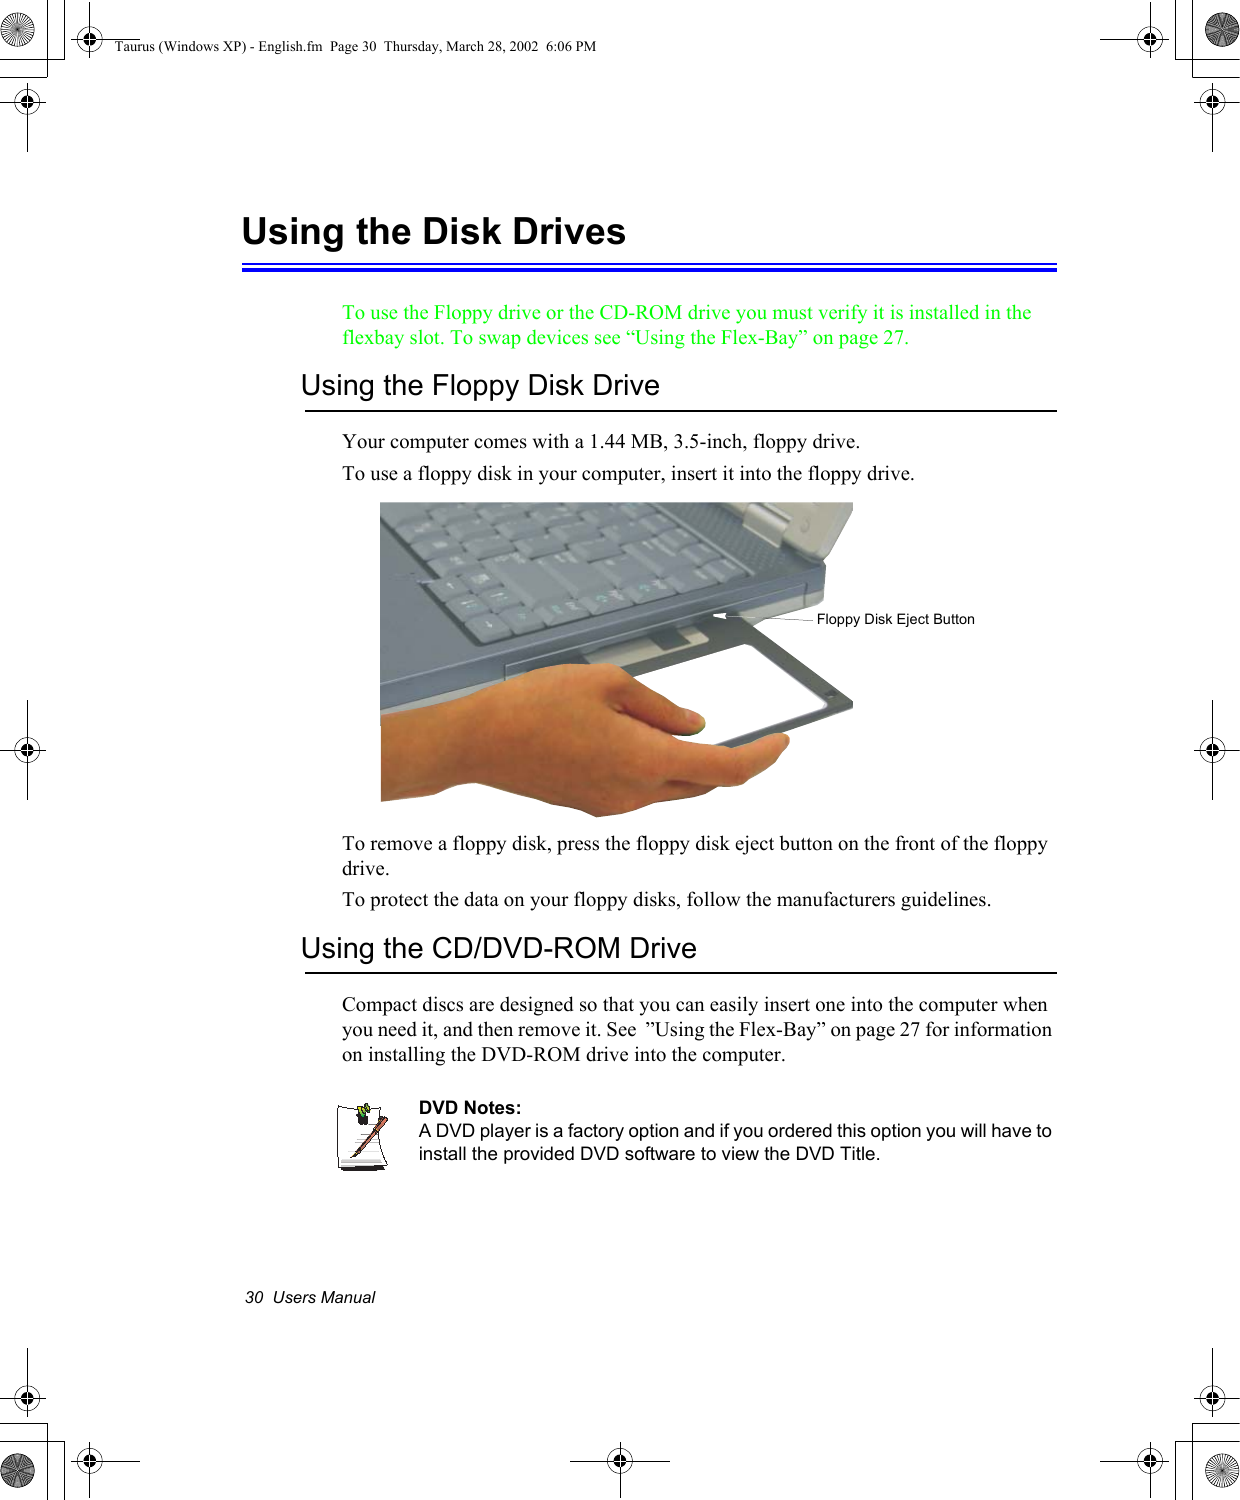 30  Users ManualUsing the Disk DrivesTo use the Floppy drive or the CD-ROM drive you must verify it is installed in the flexbay slot. To swap devices see “Using the Flex-Bay” on page 27.Using the Floppy Disk DriveYour computer comes with a 1.44 MB, 3.5-inch, floppy drive.To use a floppy disk in your computer, insert it into the floppy drive. To remove a floppy disk, press the floppy disk eject button on the front of the floppy drive.To protect the data on your floppy disks, follow the manufacturers guidelines.Using the CD/DVD-ROM DriveCompact discs are designed so that you can easily insert one into the computer when you need it, and then remove it. See  ”Using the Flex-Bay” on page 27 for information on installing the DVD-ROM drive into the computer.DVD Notes:A DVD player is a factory option and if you ordered this option you will have to install the provided DVD software to view the DVD Title.Floppy Disk Eject ButtonTaurus (Windows XP) - English.fm  Page 30  Thursday, March 28, 2002  6:06 PM